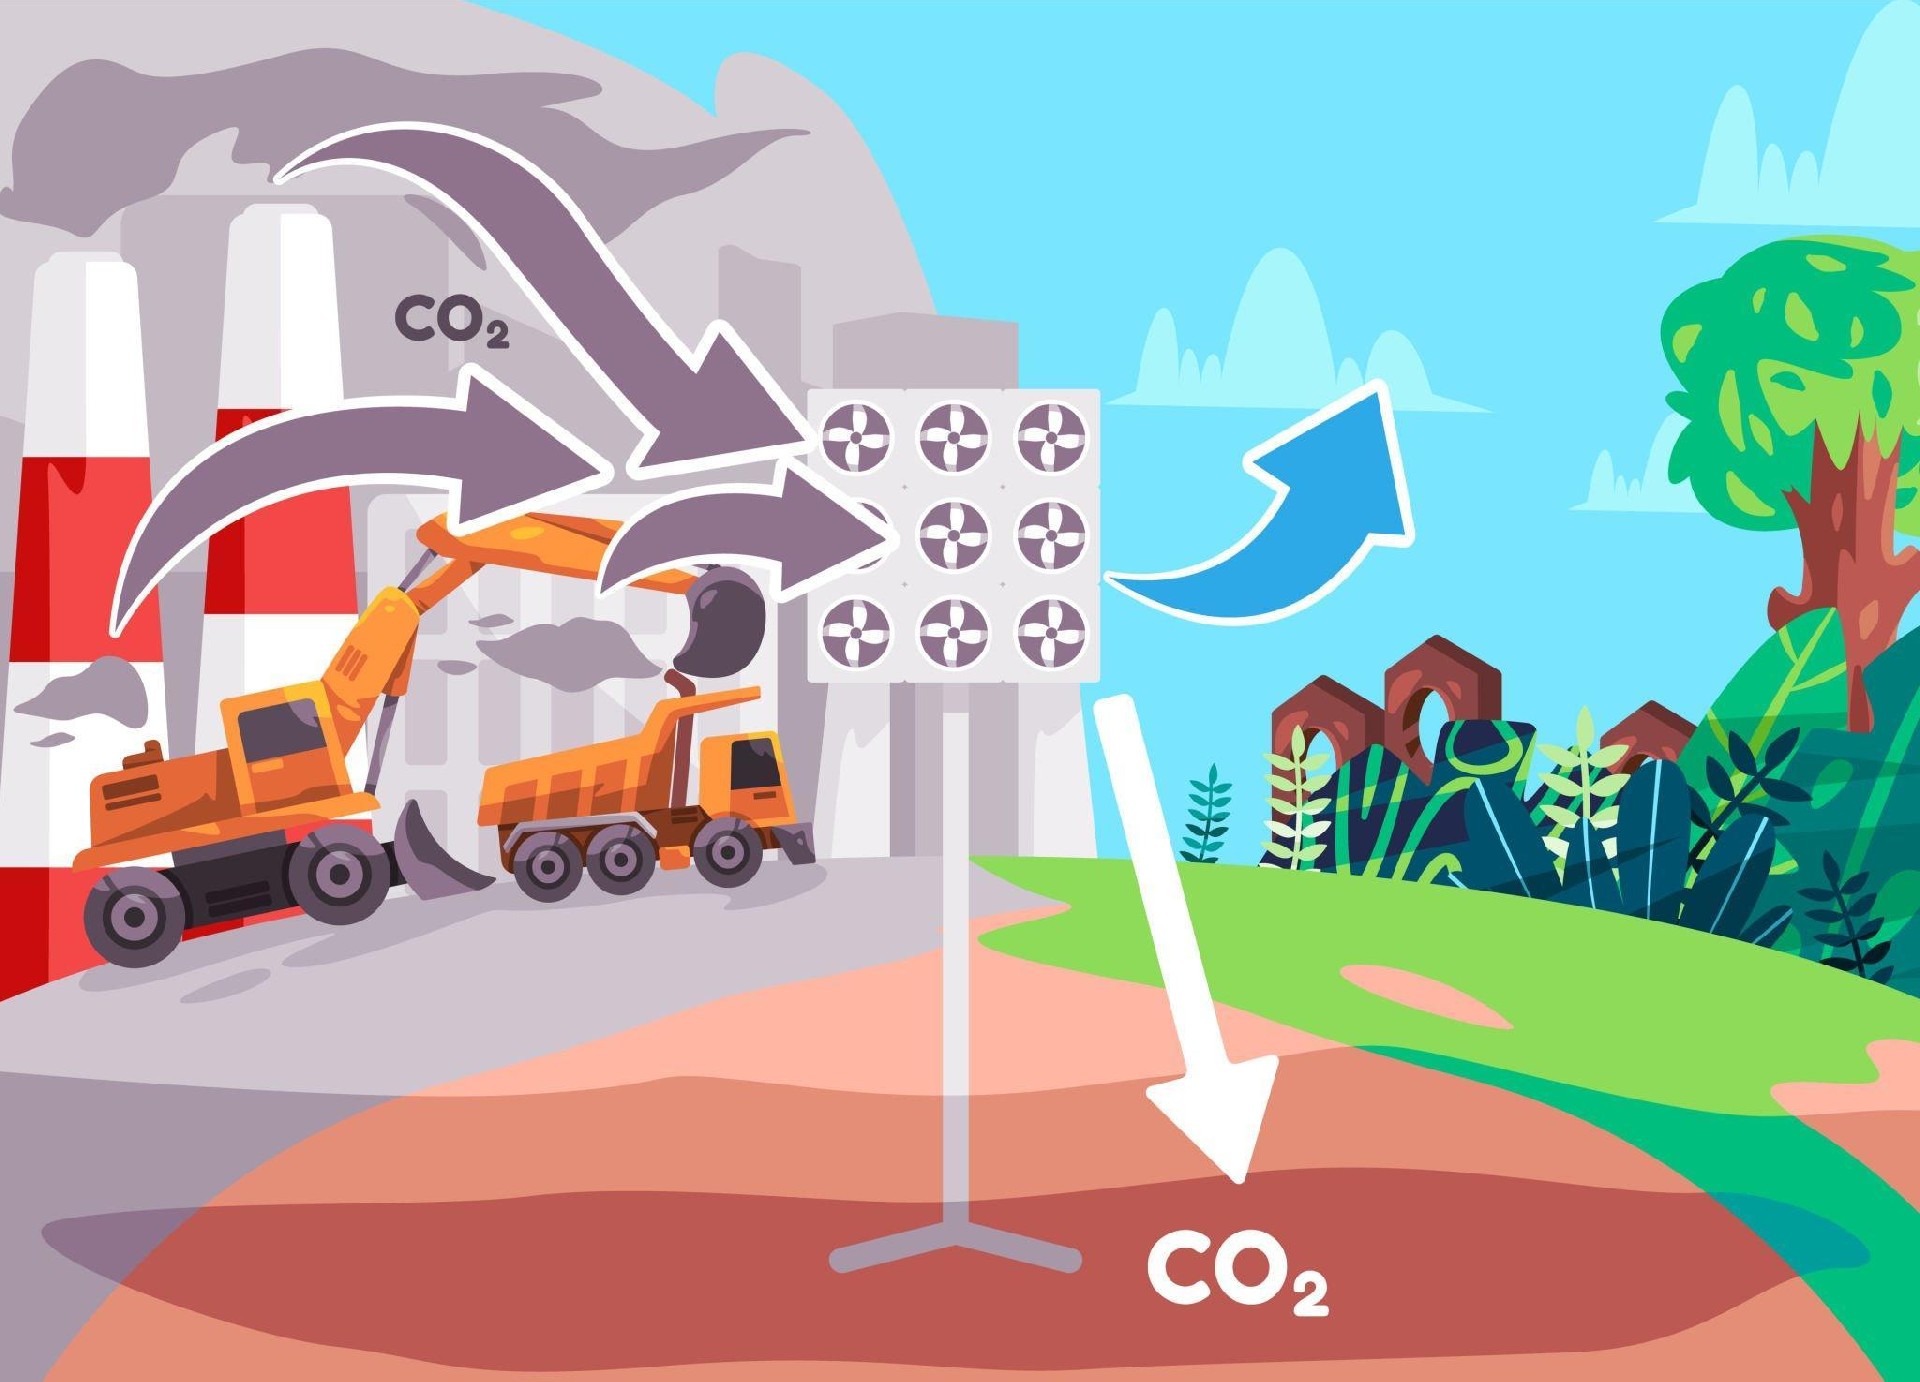 Integration of carbon capture and conversion